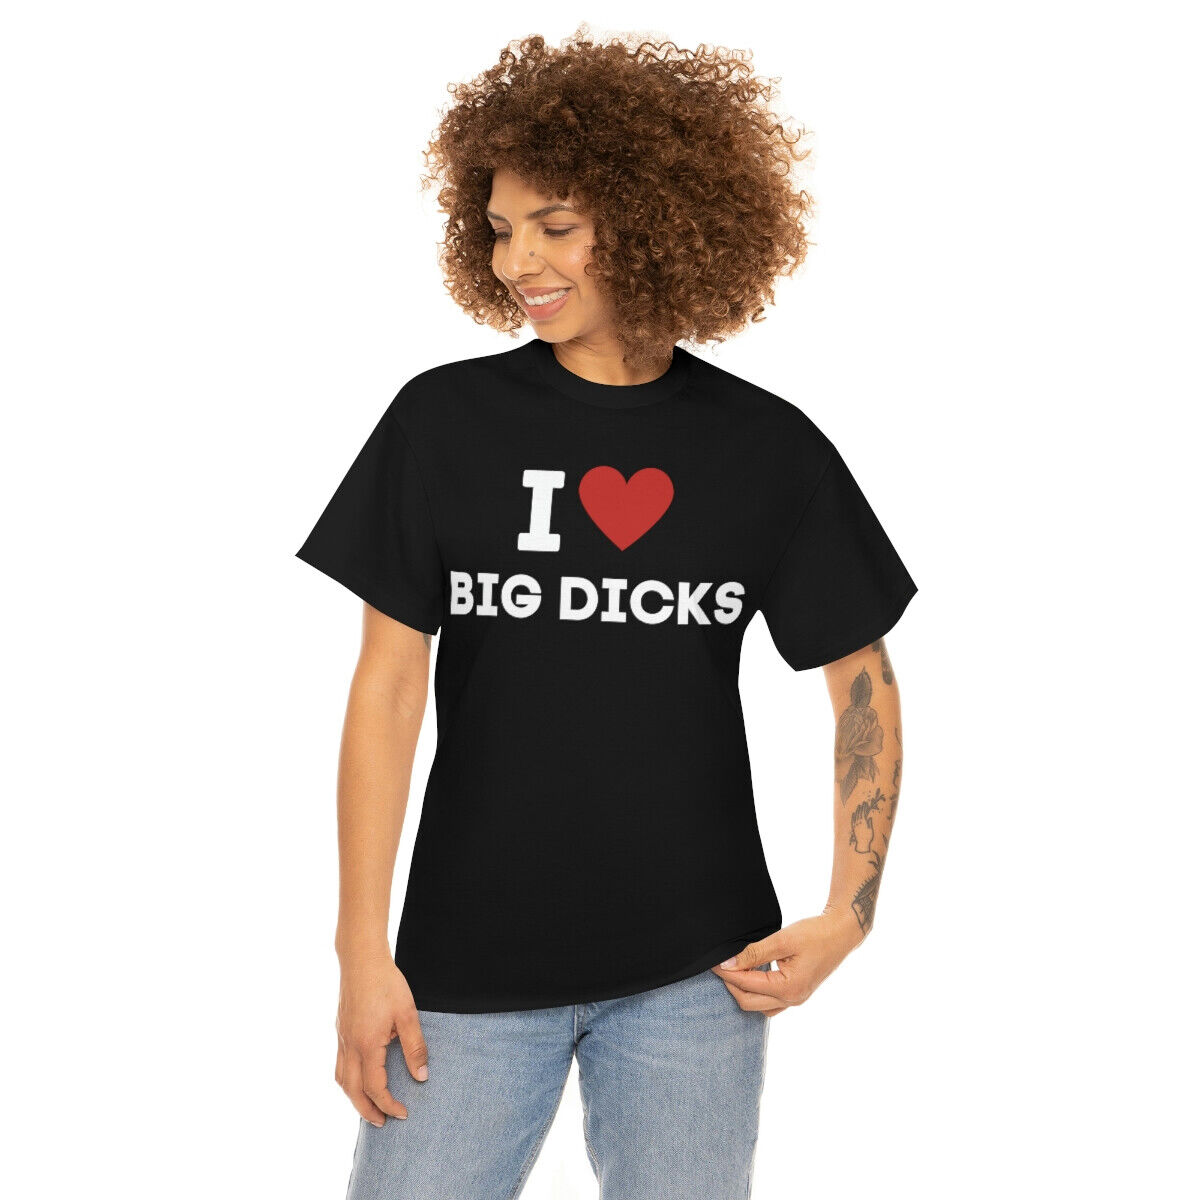 becky harland recommends I Love Big Dicks